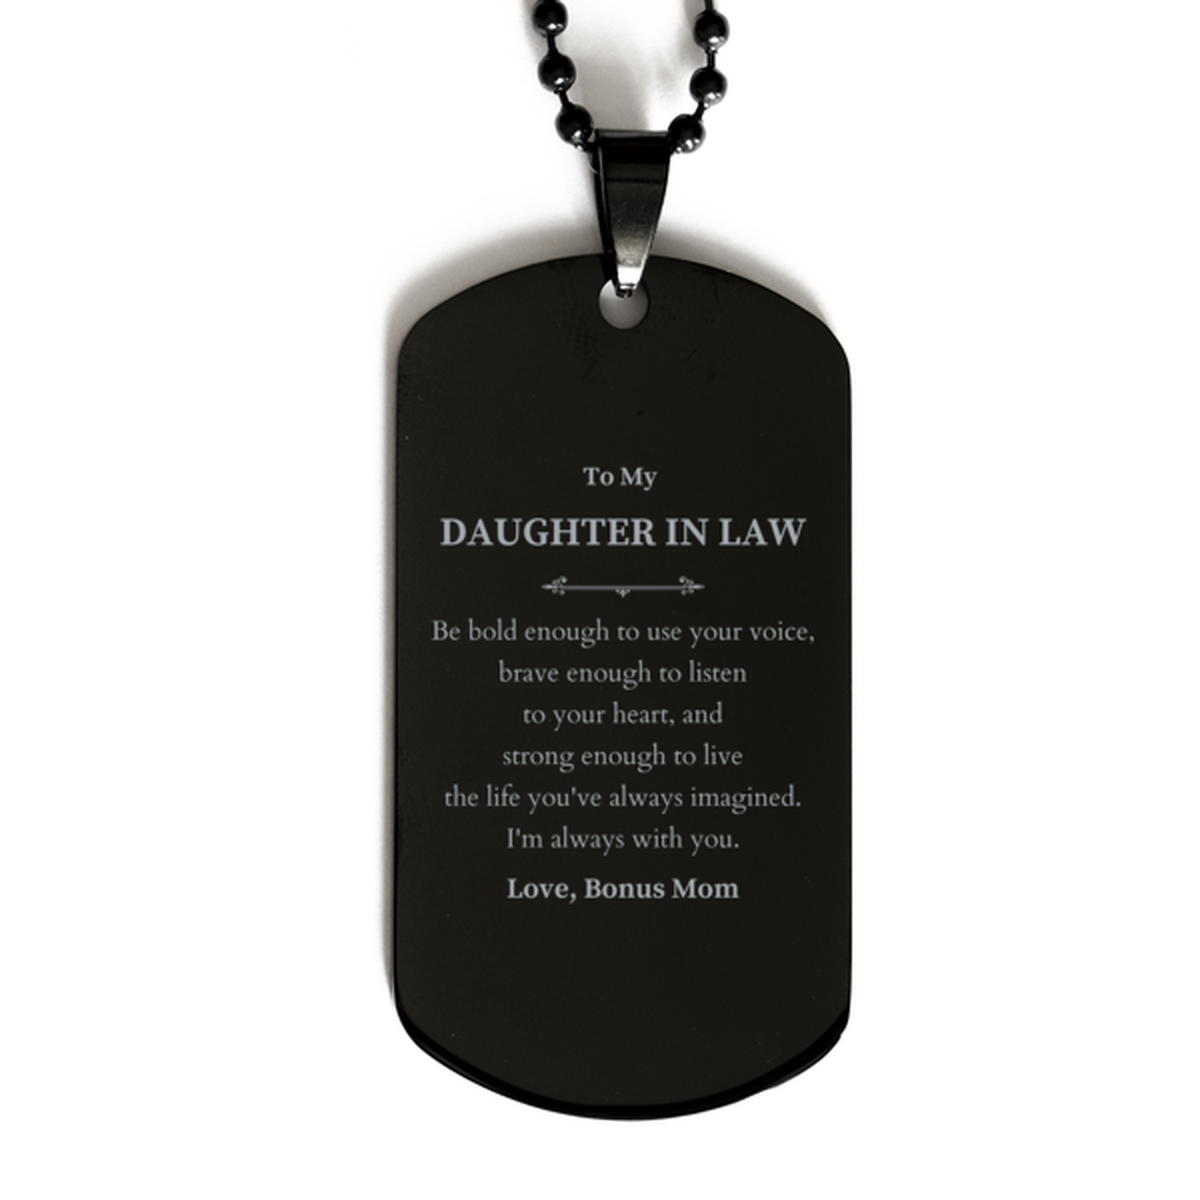 Keepsake Daughter In Law Black Dog Tag Gift Idea Graduation Christmas Birthday Daughter In Law from Bonus Mom, Daughter In Law Be bold enough to use your voice, brave enough to listen to your heart. Love, Bonus Mom